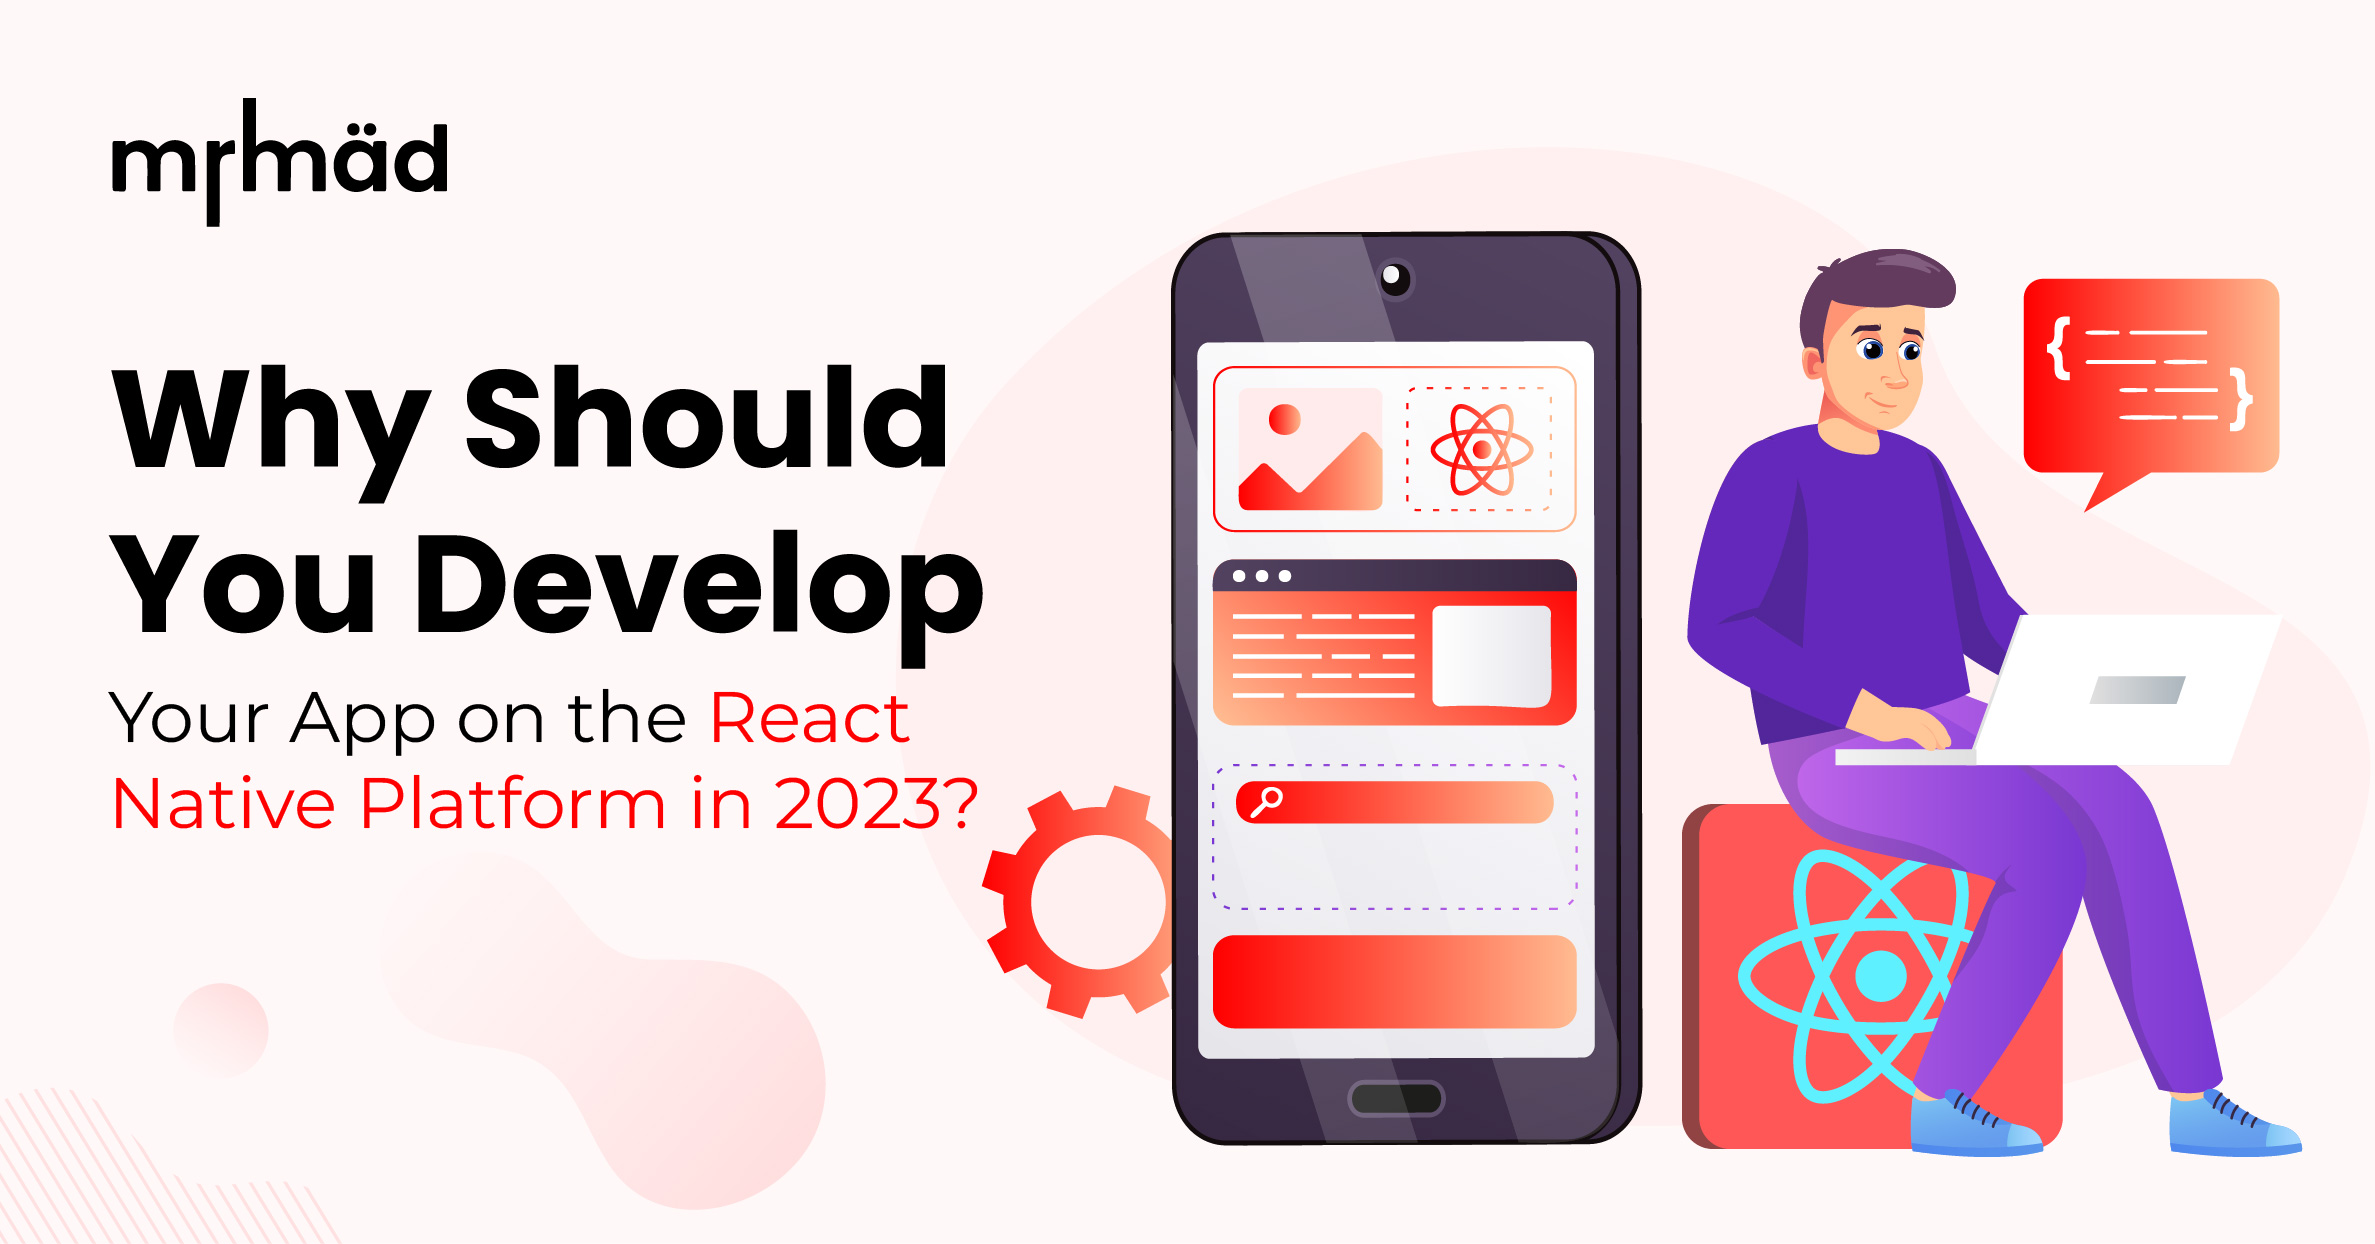 Why Should You Develop Your App on the React Native Platform in 2023?